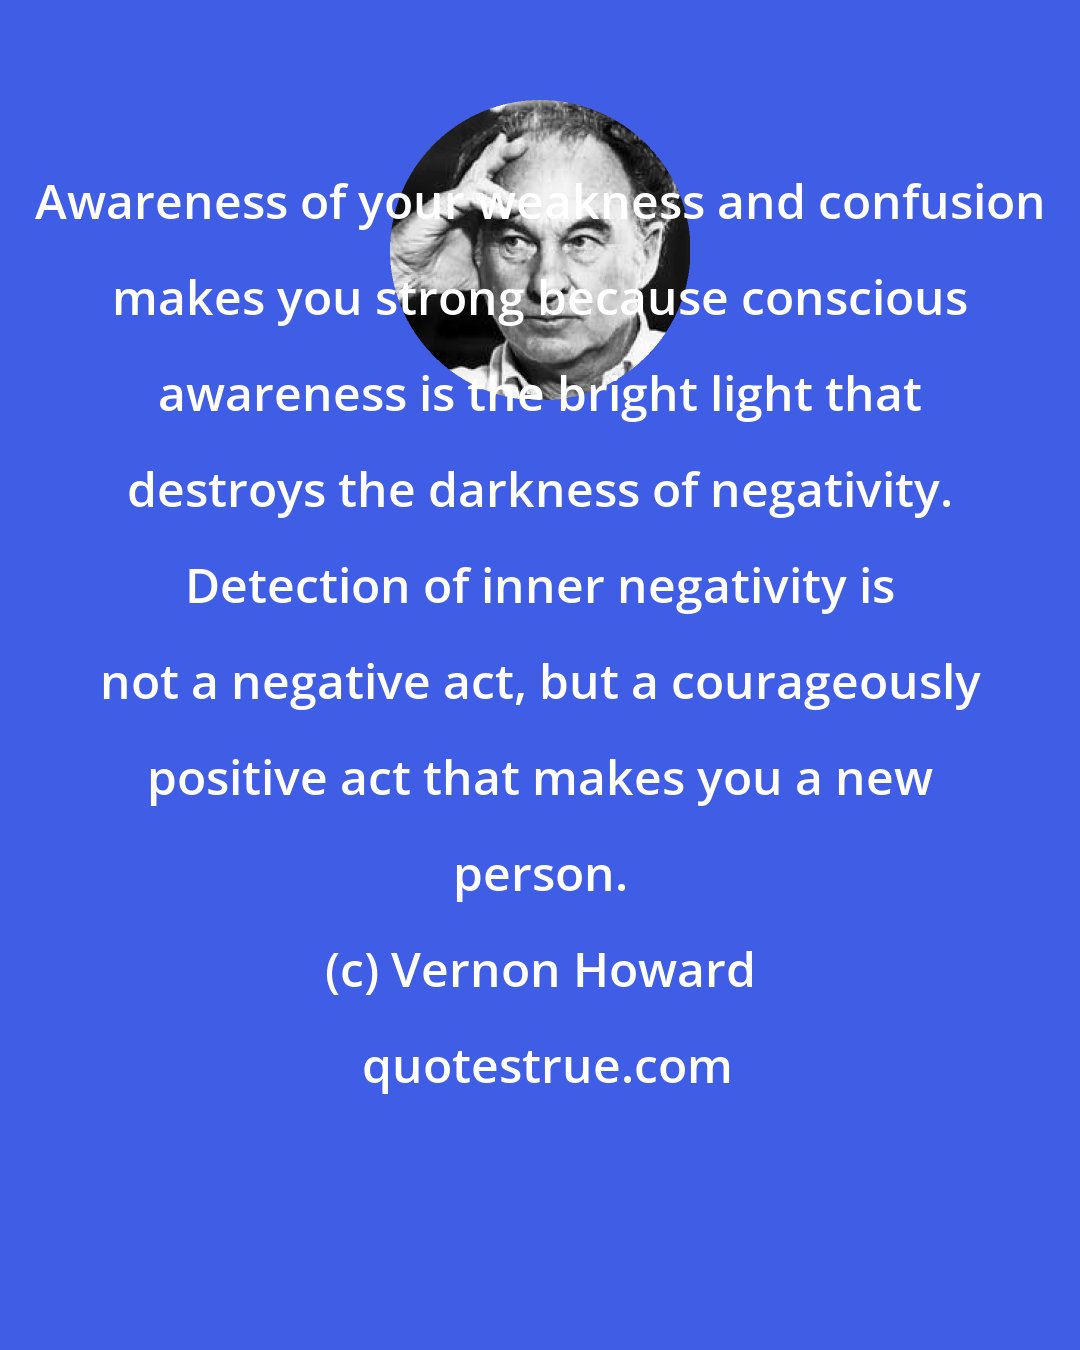 Vernon Howard: Awareness of your weakness and confusion makes you strong because conscious awareness is the bright light that destroys the darkness of negativity. Detection of inner negativity is not a negative act, but a courageously positive act that makes you a new person.